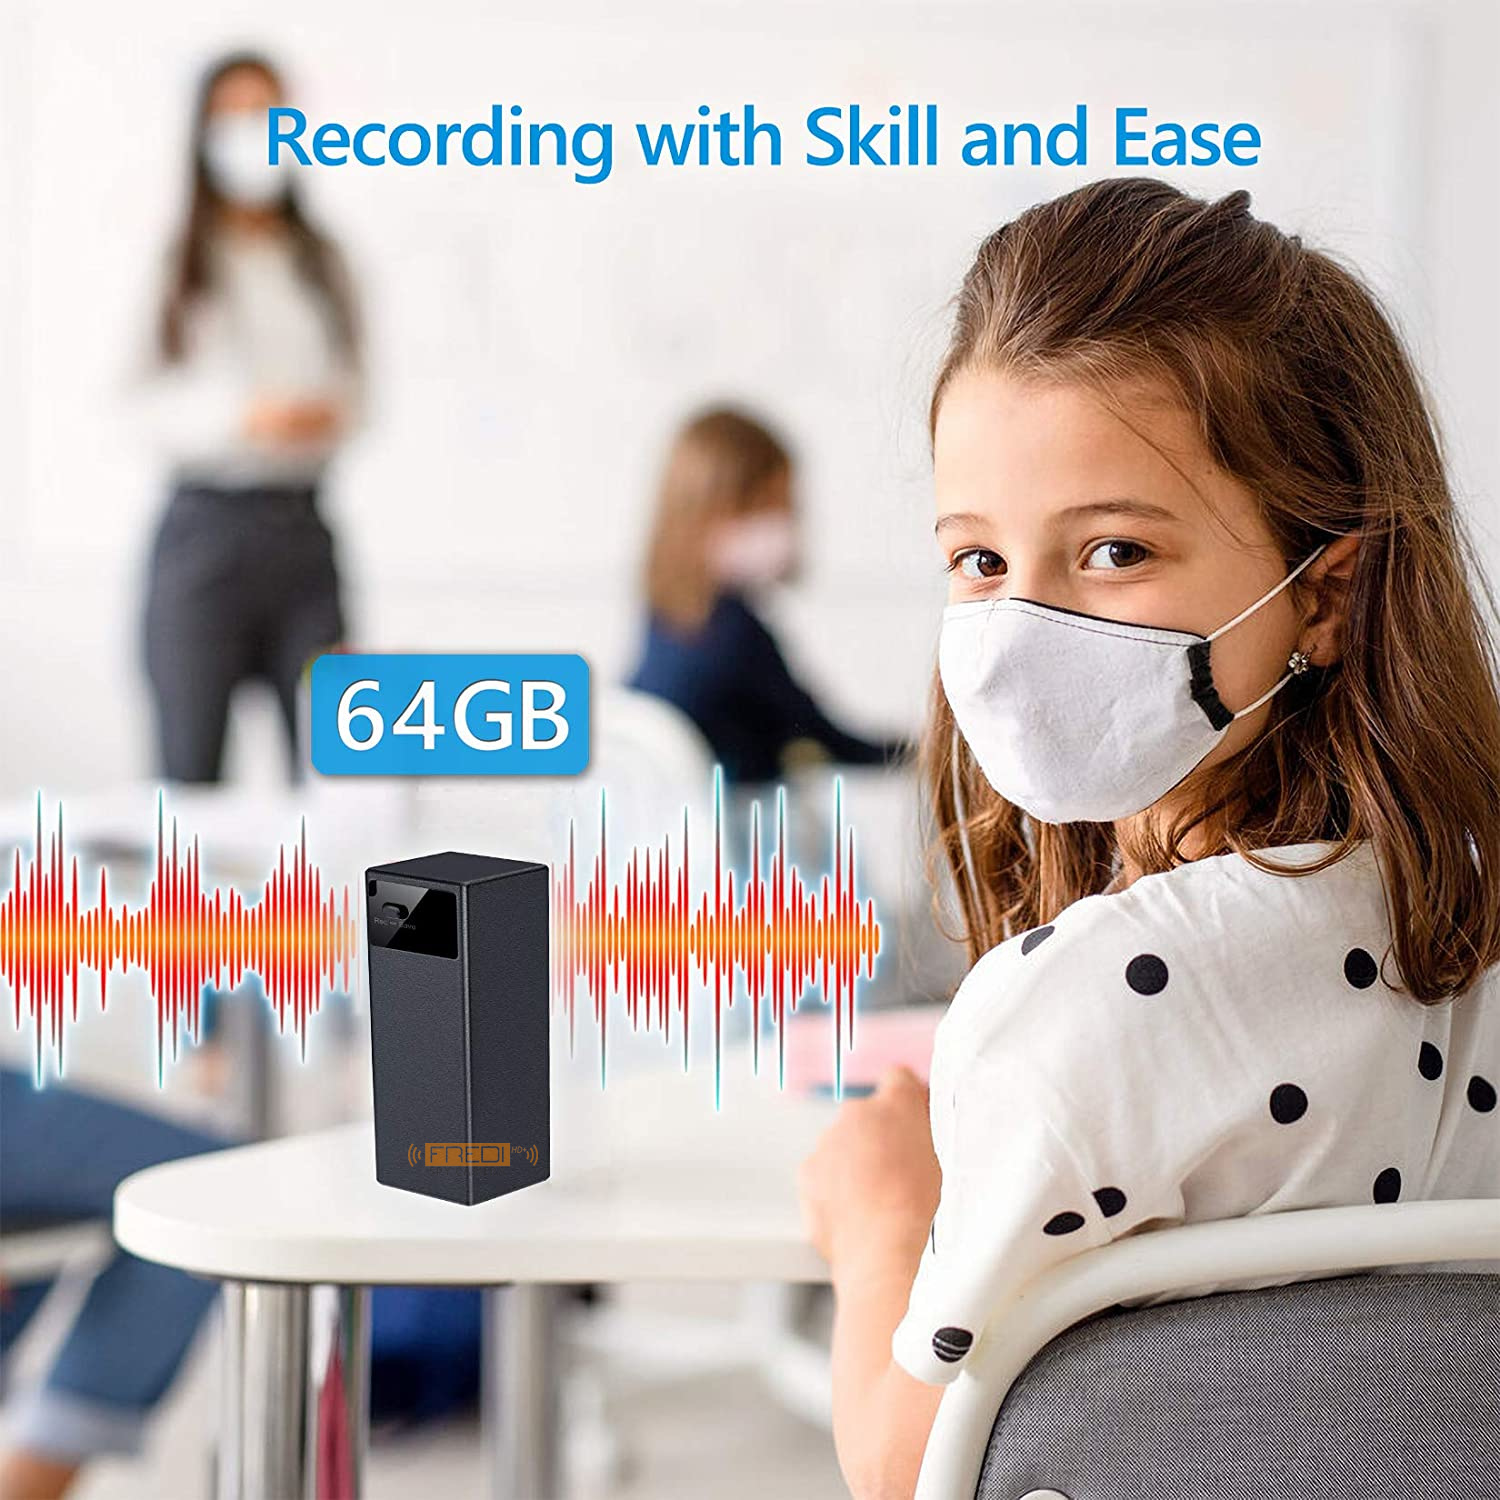 FREDI HD PLUS 64GB Voice Activated Recorder with The Longest Battery Life, Continuous Recording up to 15 Days, MP3 Audio Records for Home/Office/Class/Interviews/Car - Black